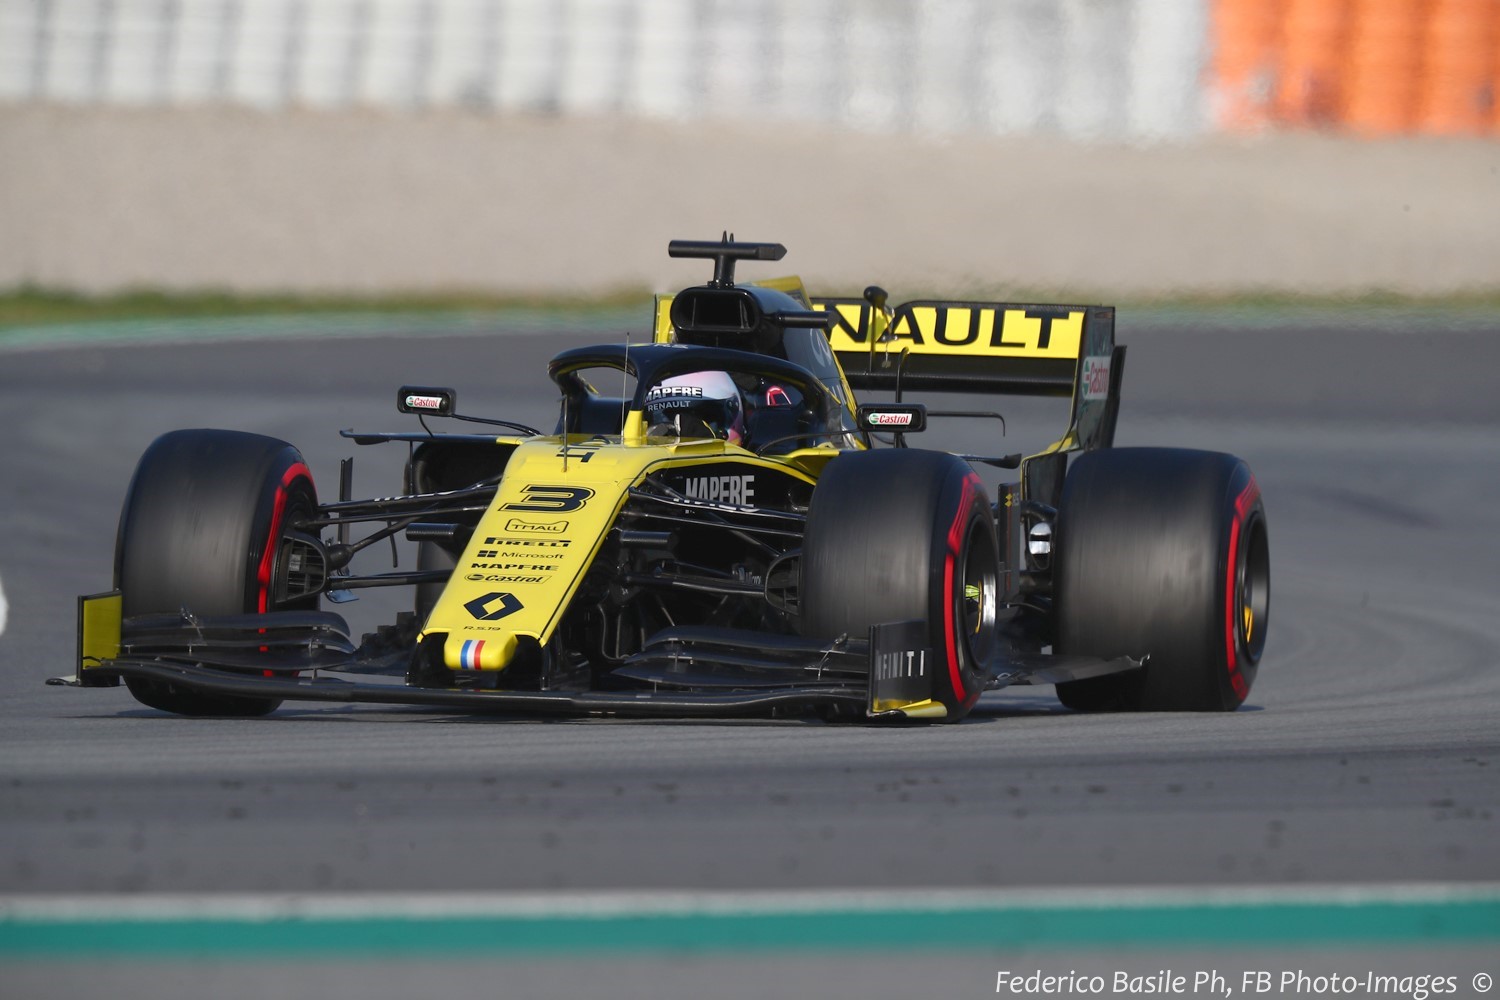 Daniel Ricciardo in the Renault - the team Prost is part of